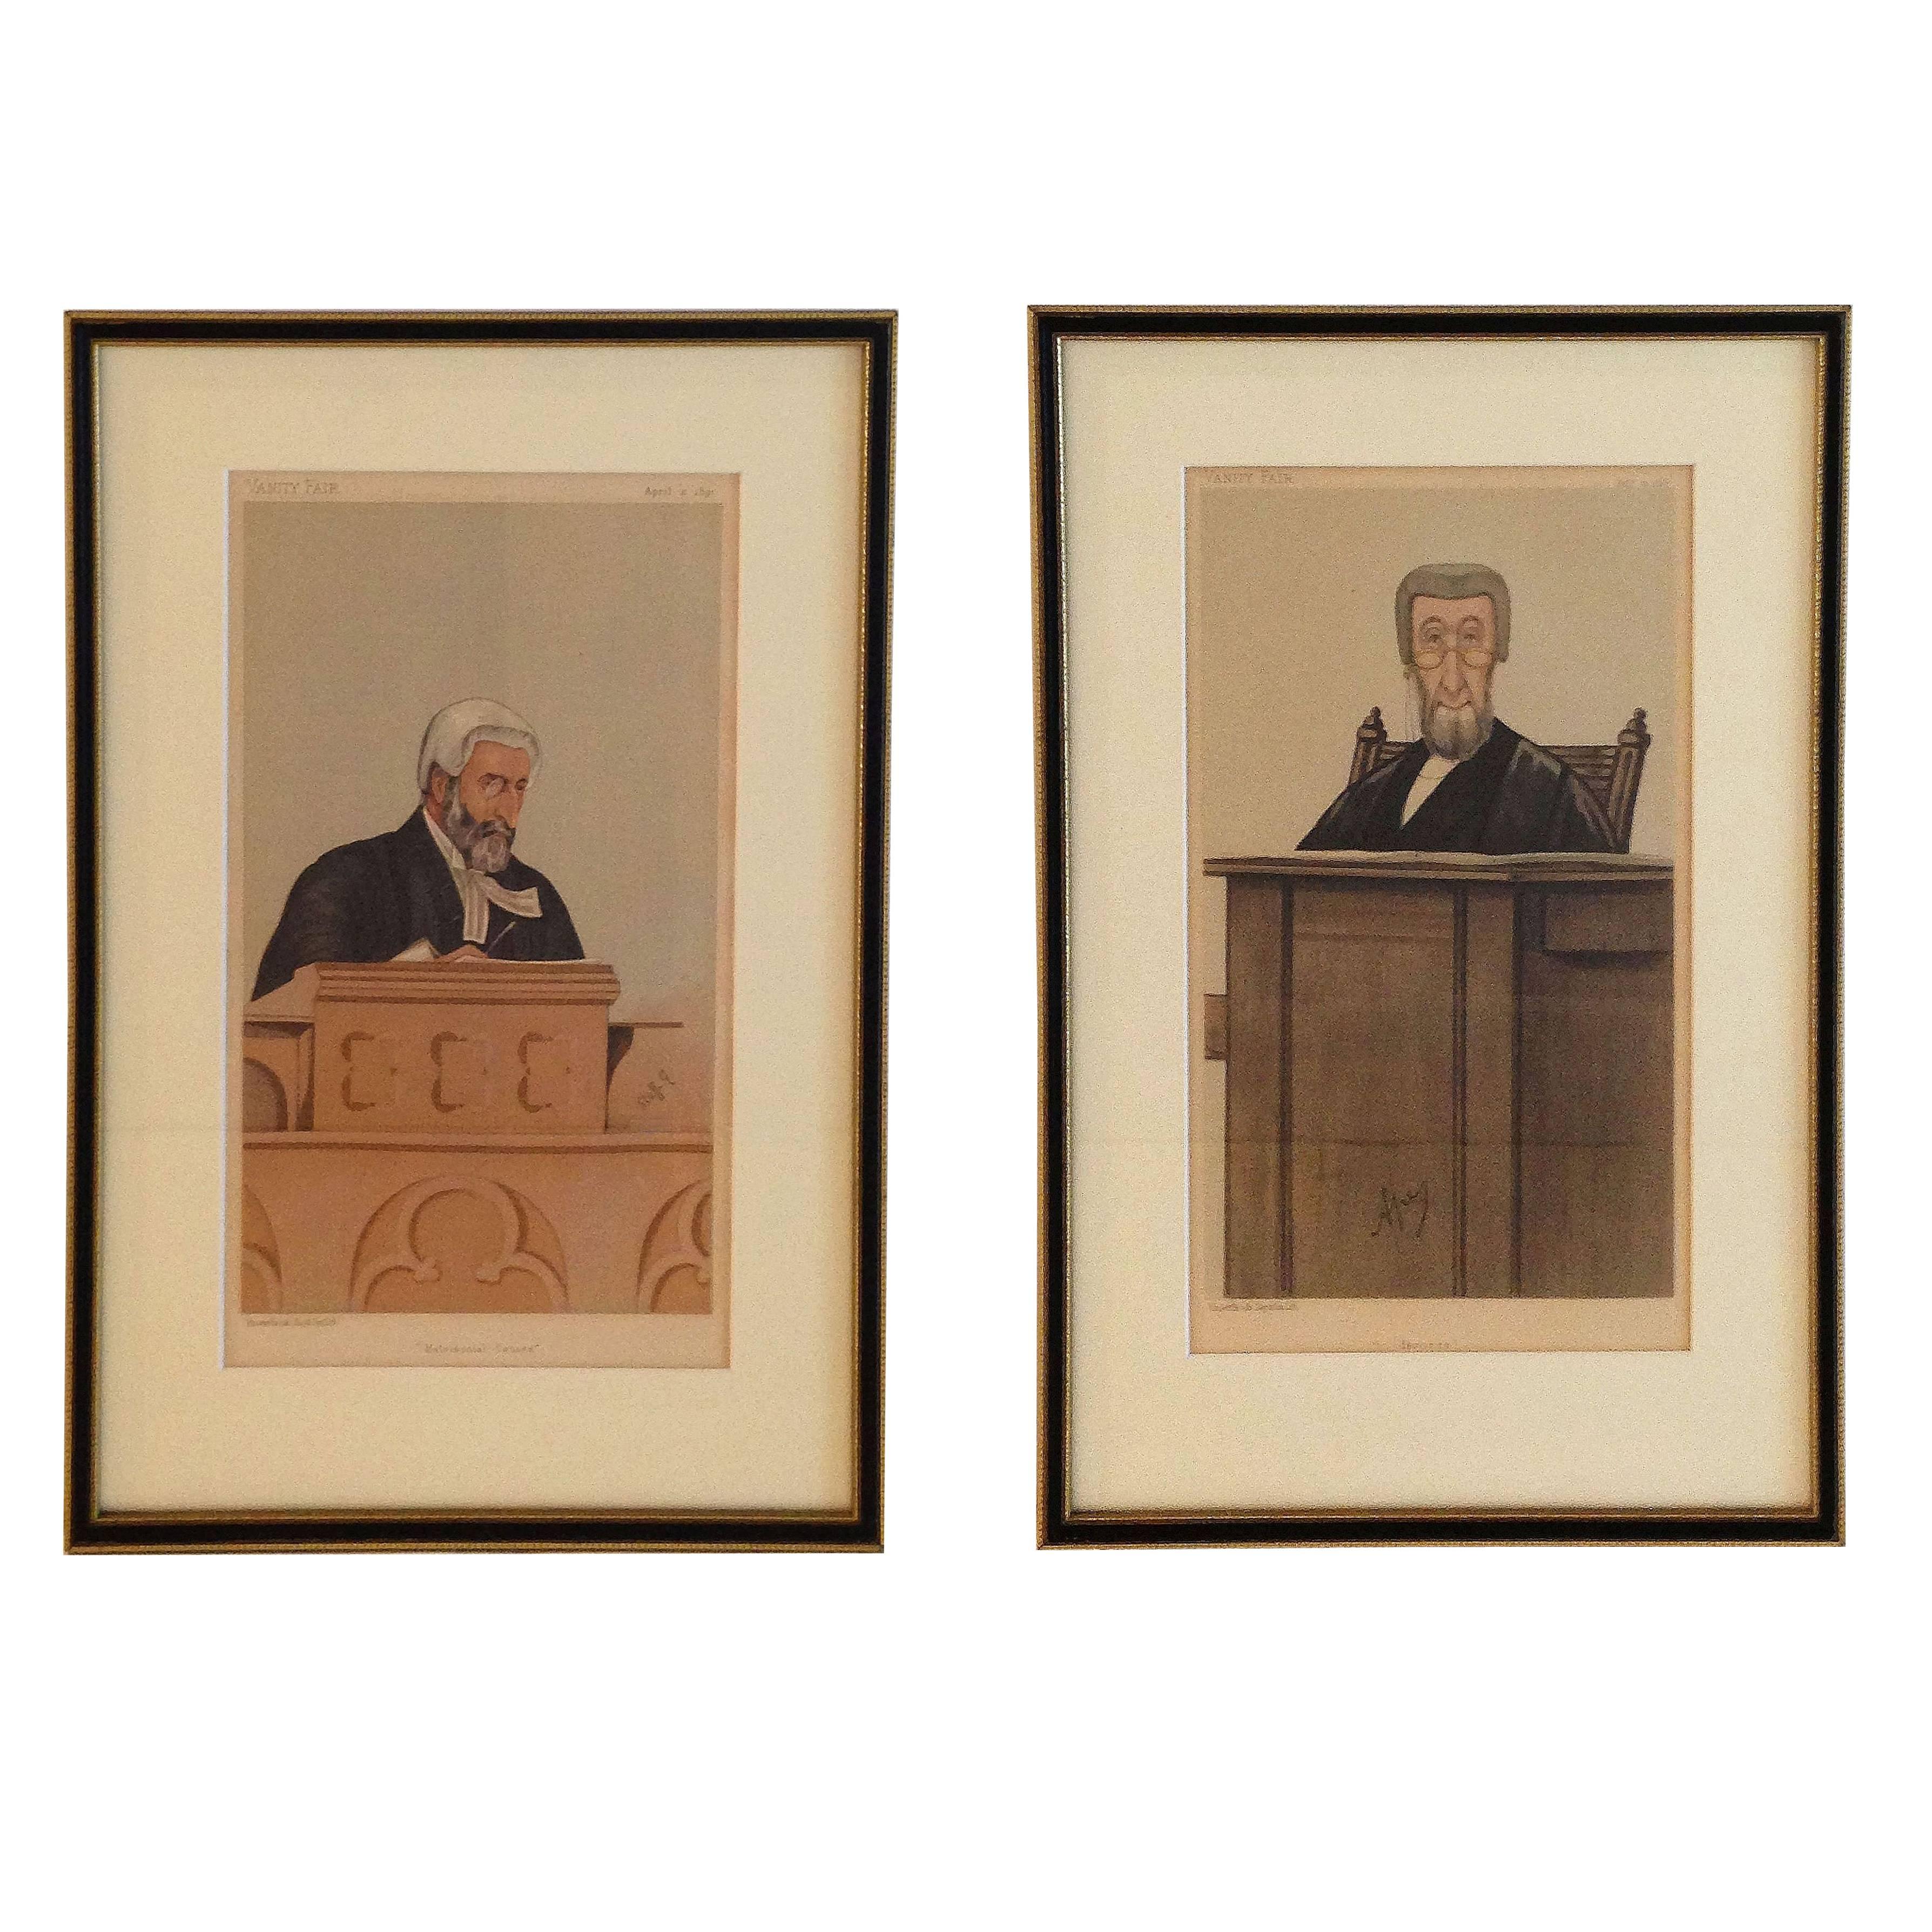 Vanity Fair "Spy" Prints of Judges (Six Available - Priced Individually)